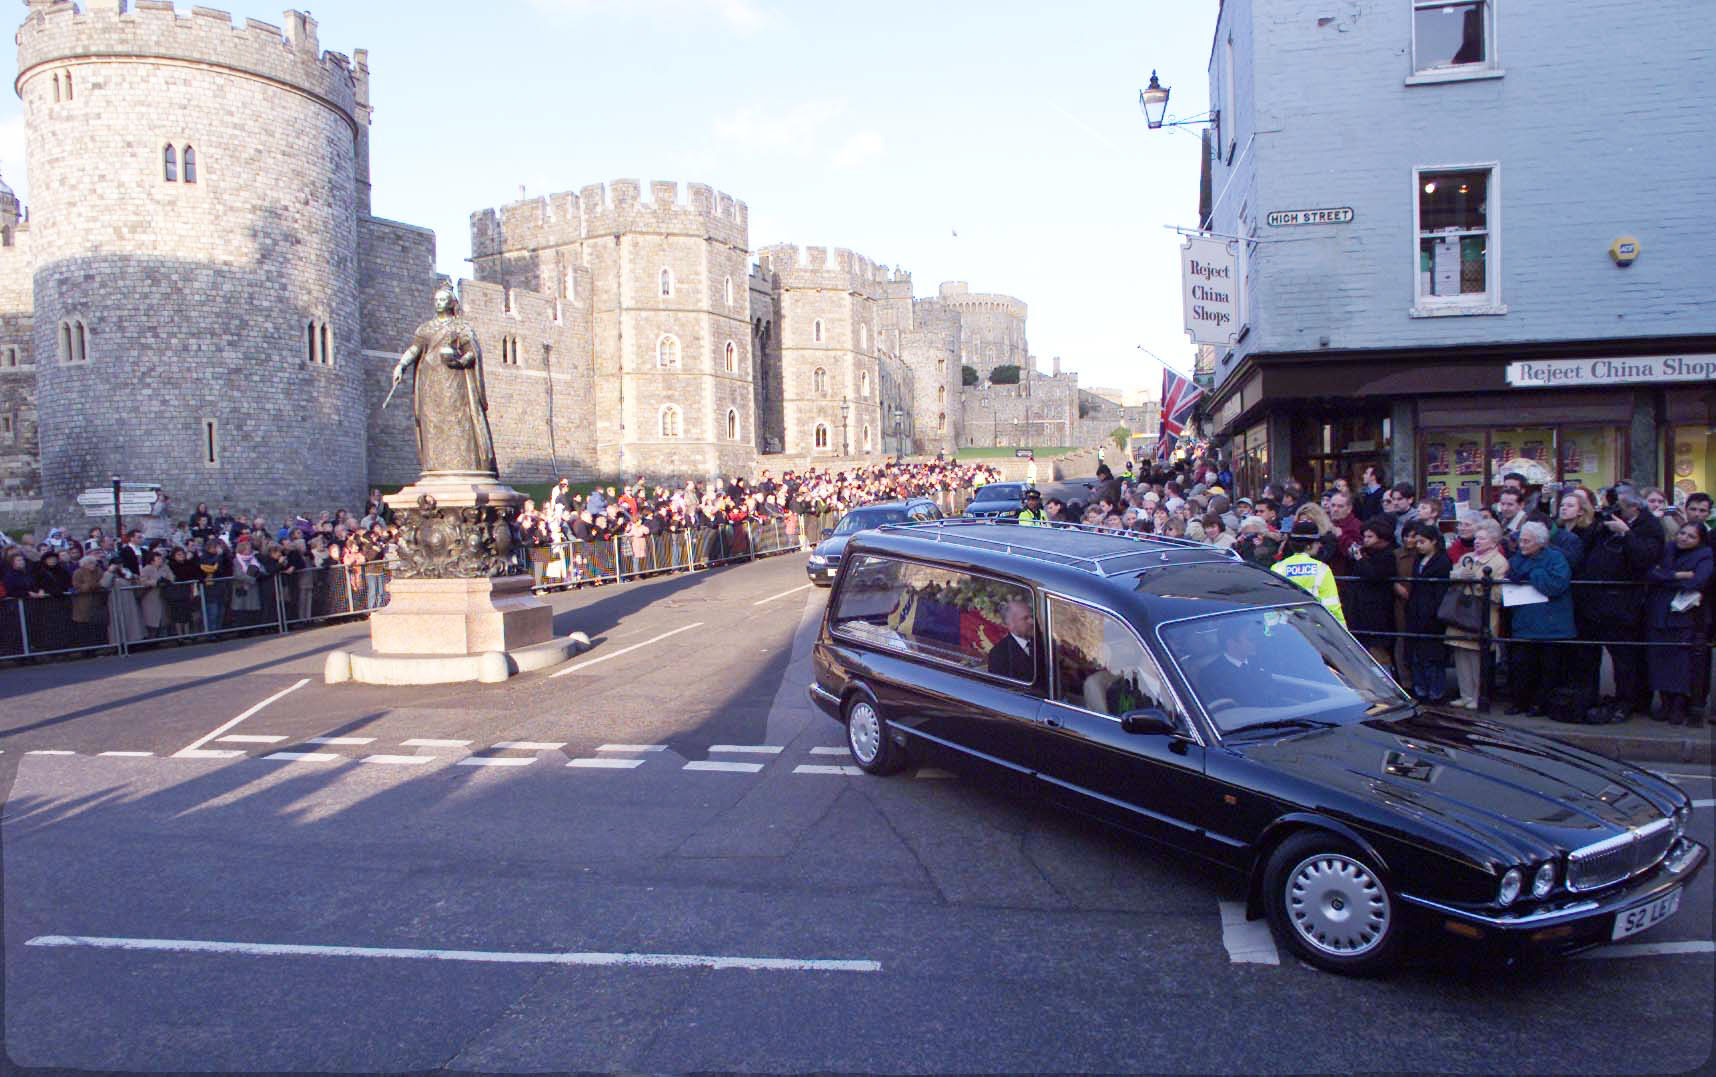 <p>Mourners watched the hearse carrying the coffin of Princess Margaret leave Windsor Castle after her funeral service on its way to Slough Crematorium in Berkshire, England, on Feb. 15, 2002. </p><p>The Countess of Snowdon is one of the few royals who chose to be cremated rather than buried. She is interred alongside her parents and sister in their small family chapel inside St. George's Chapel.</p>